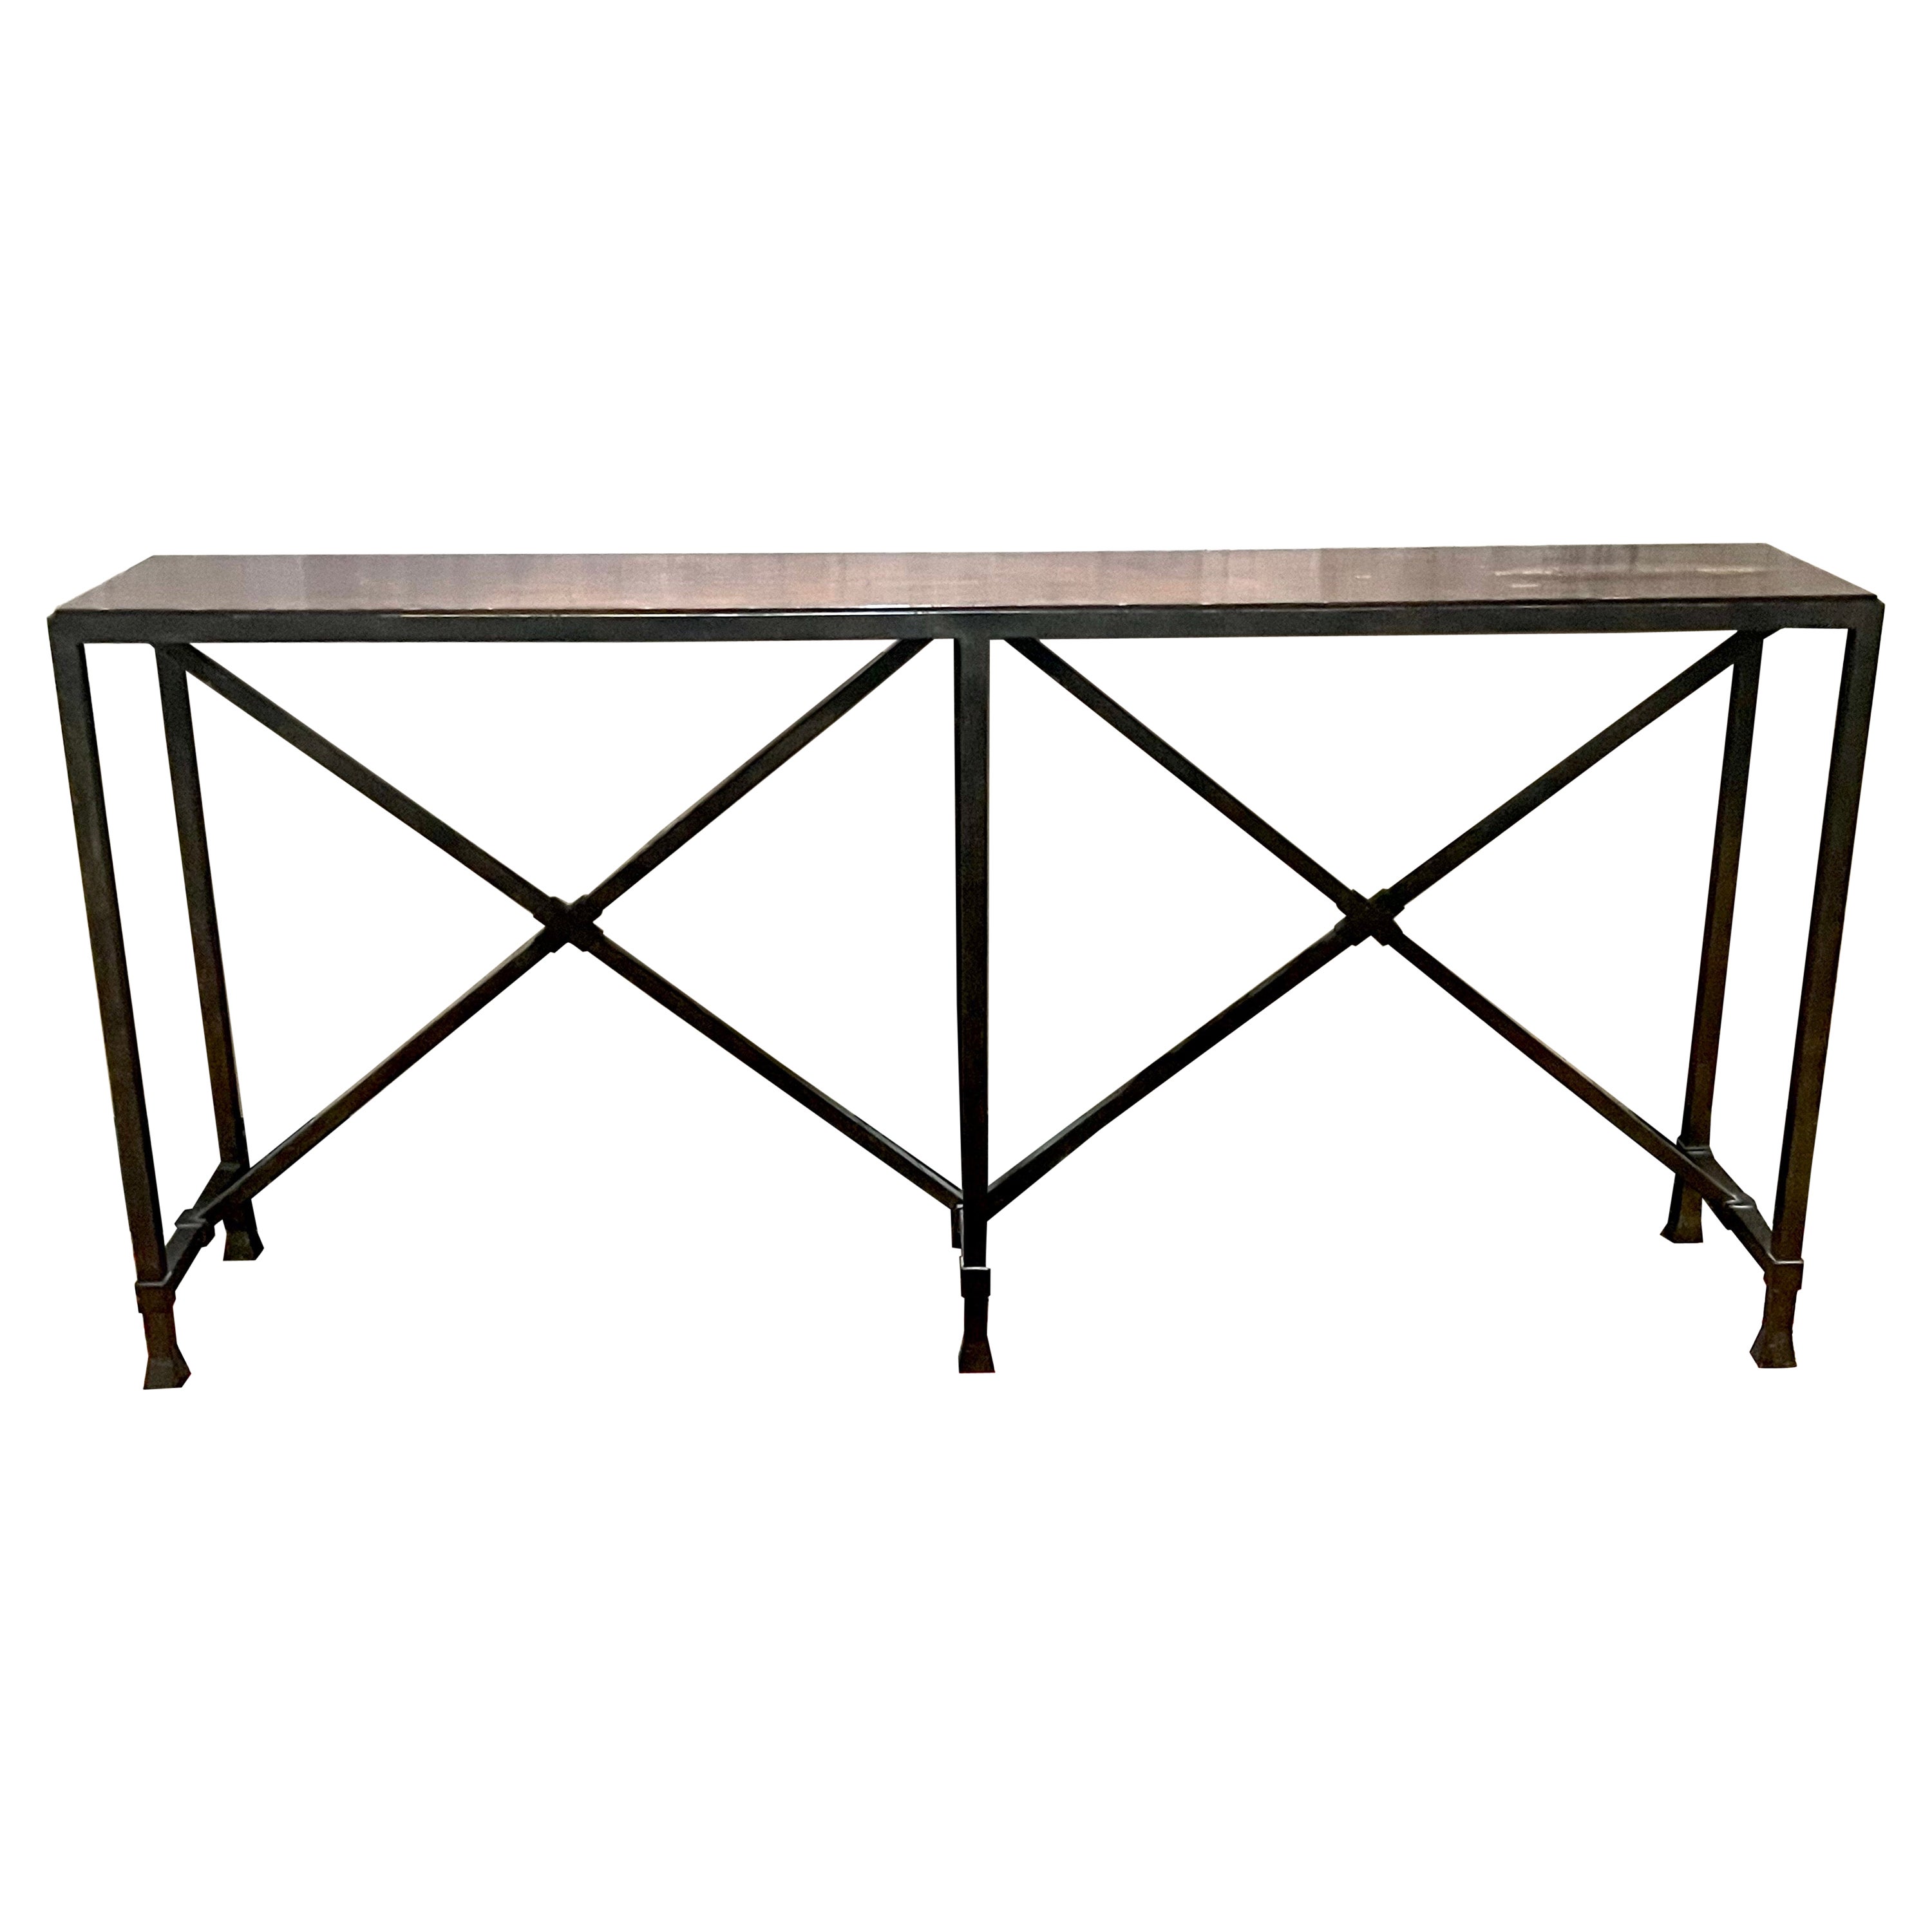 Custom French Mid-Century Modern Neoclassical Iron & Stone Console, Raymon Subes For Sale